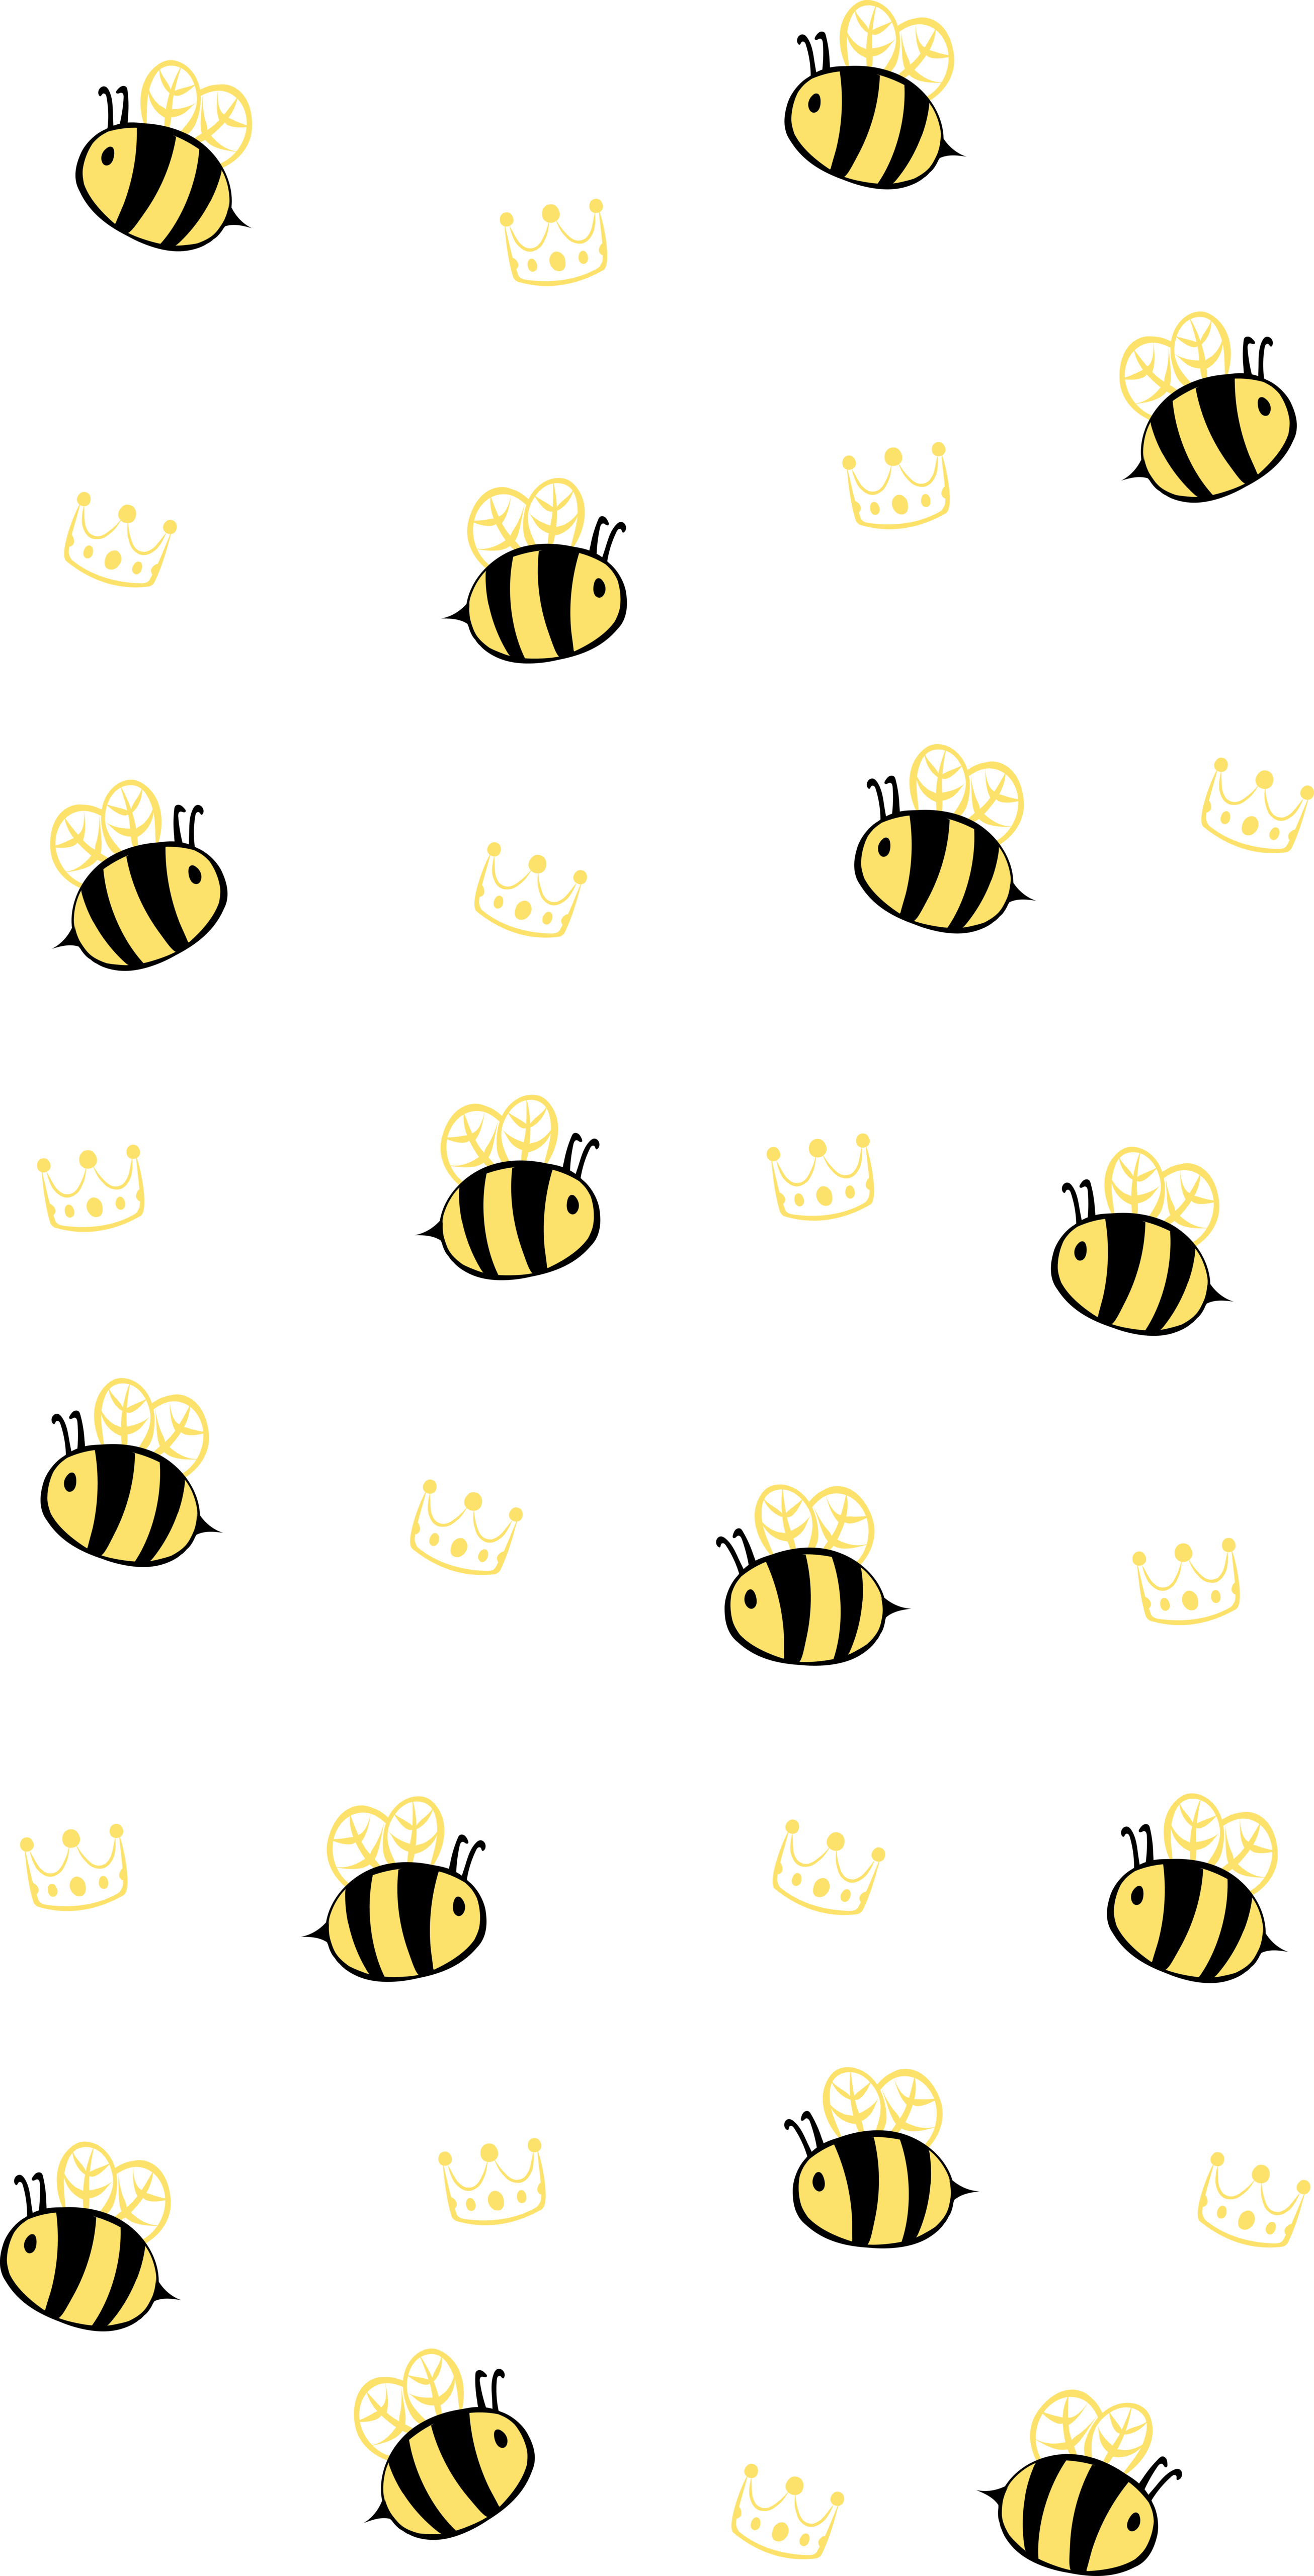 Aesthetic Bees Wallpapers - Wallpaper Cave